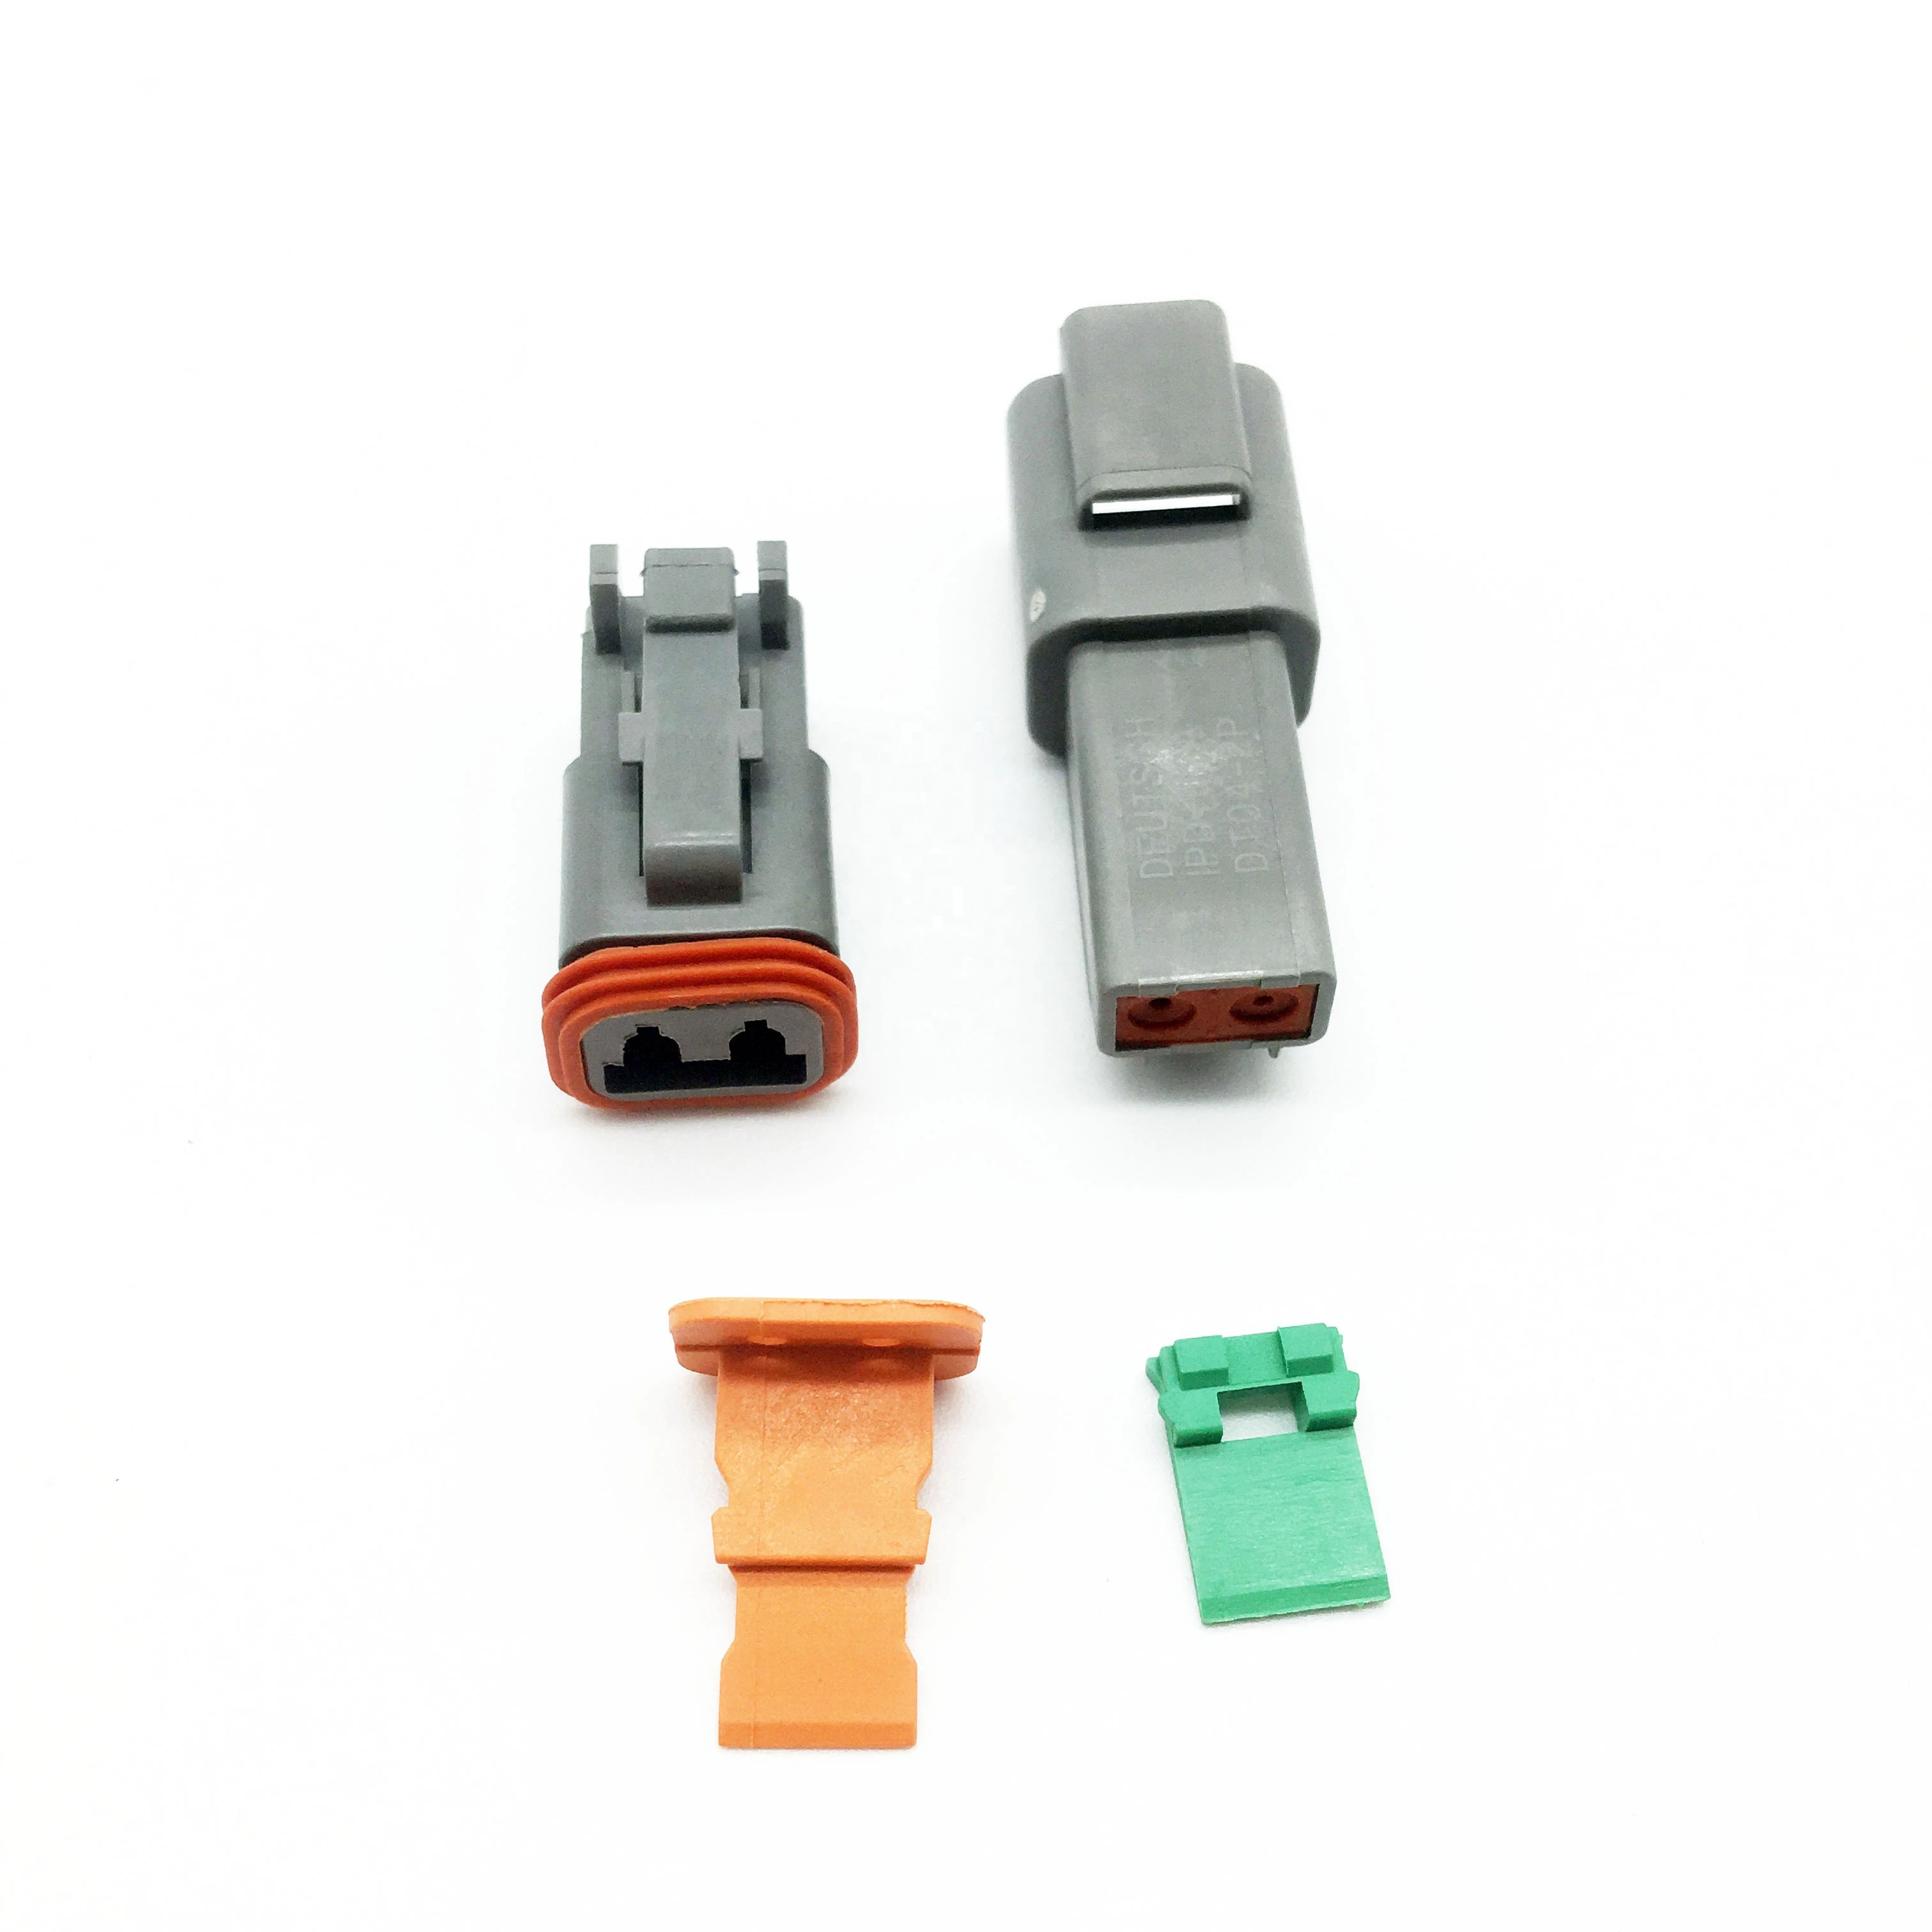 High quality DT series 2 3 4 6 8 12 pin male female Automotive Deutsch Connector